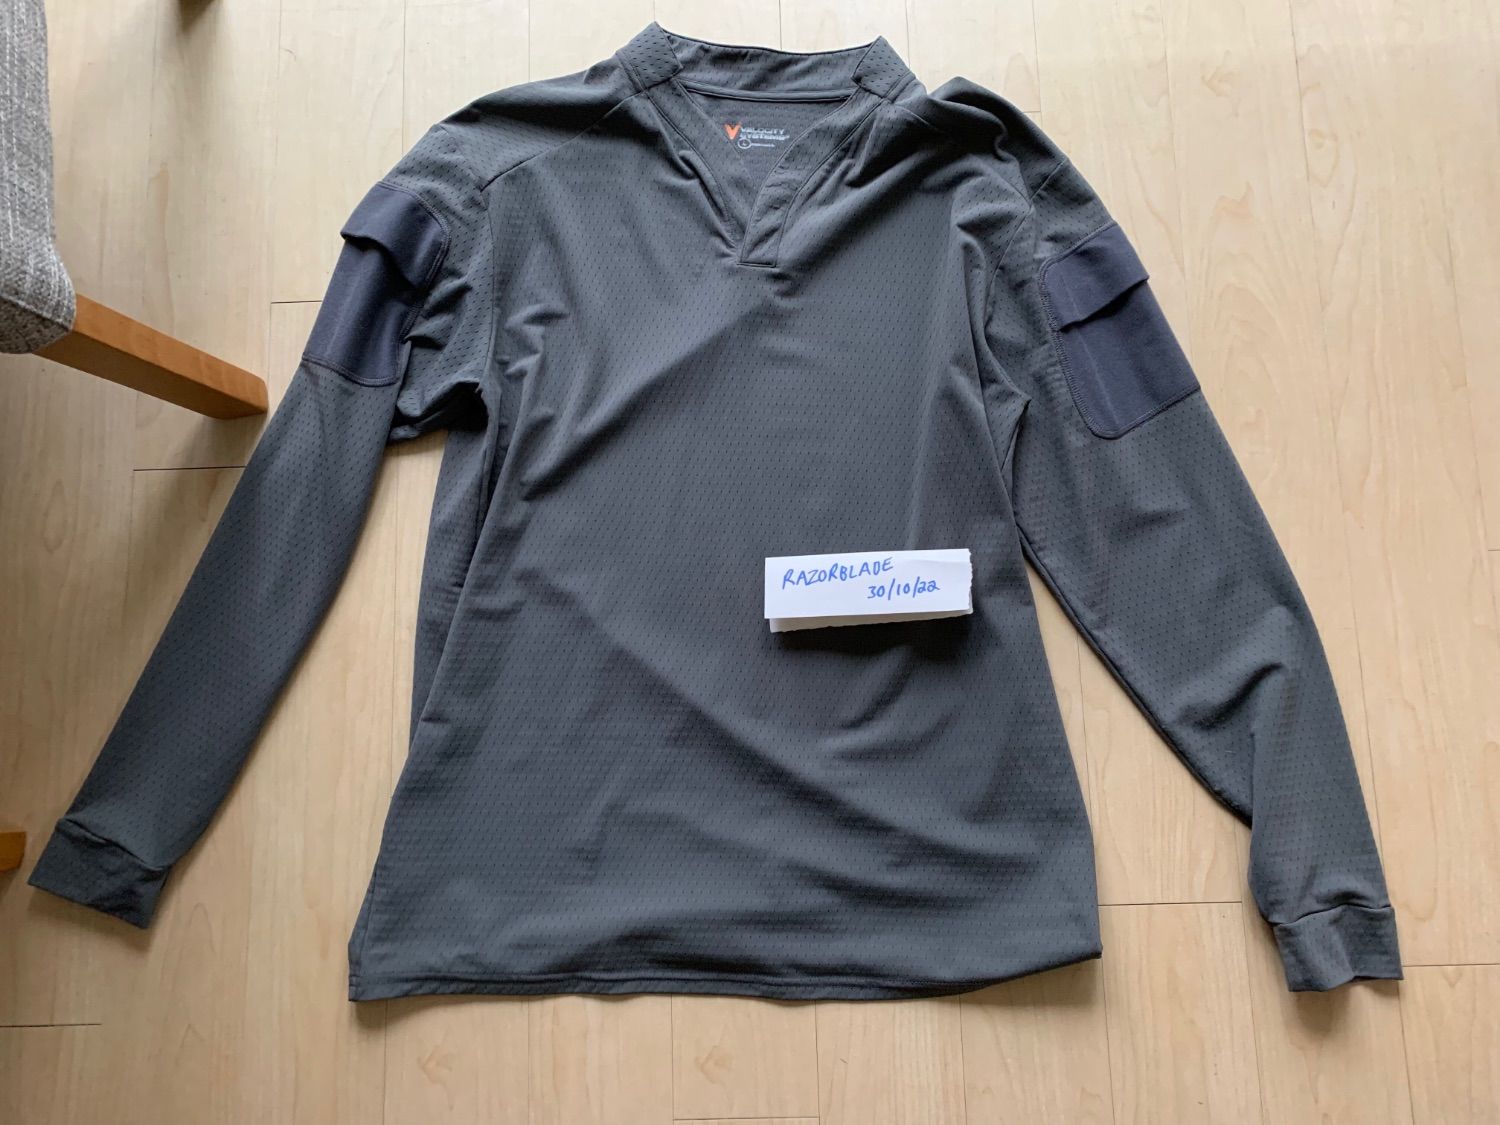 Arcteryx LEAF and Velocity Systems combat clothing for sale - Gear ...